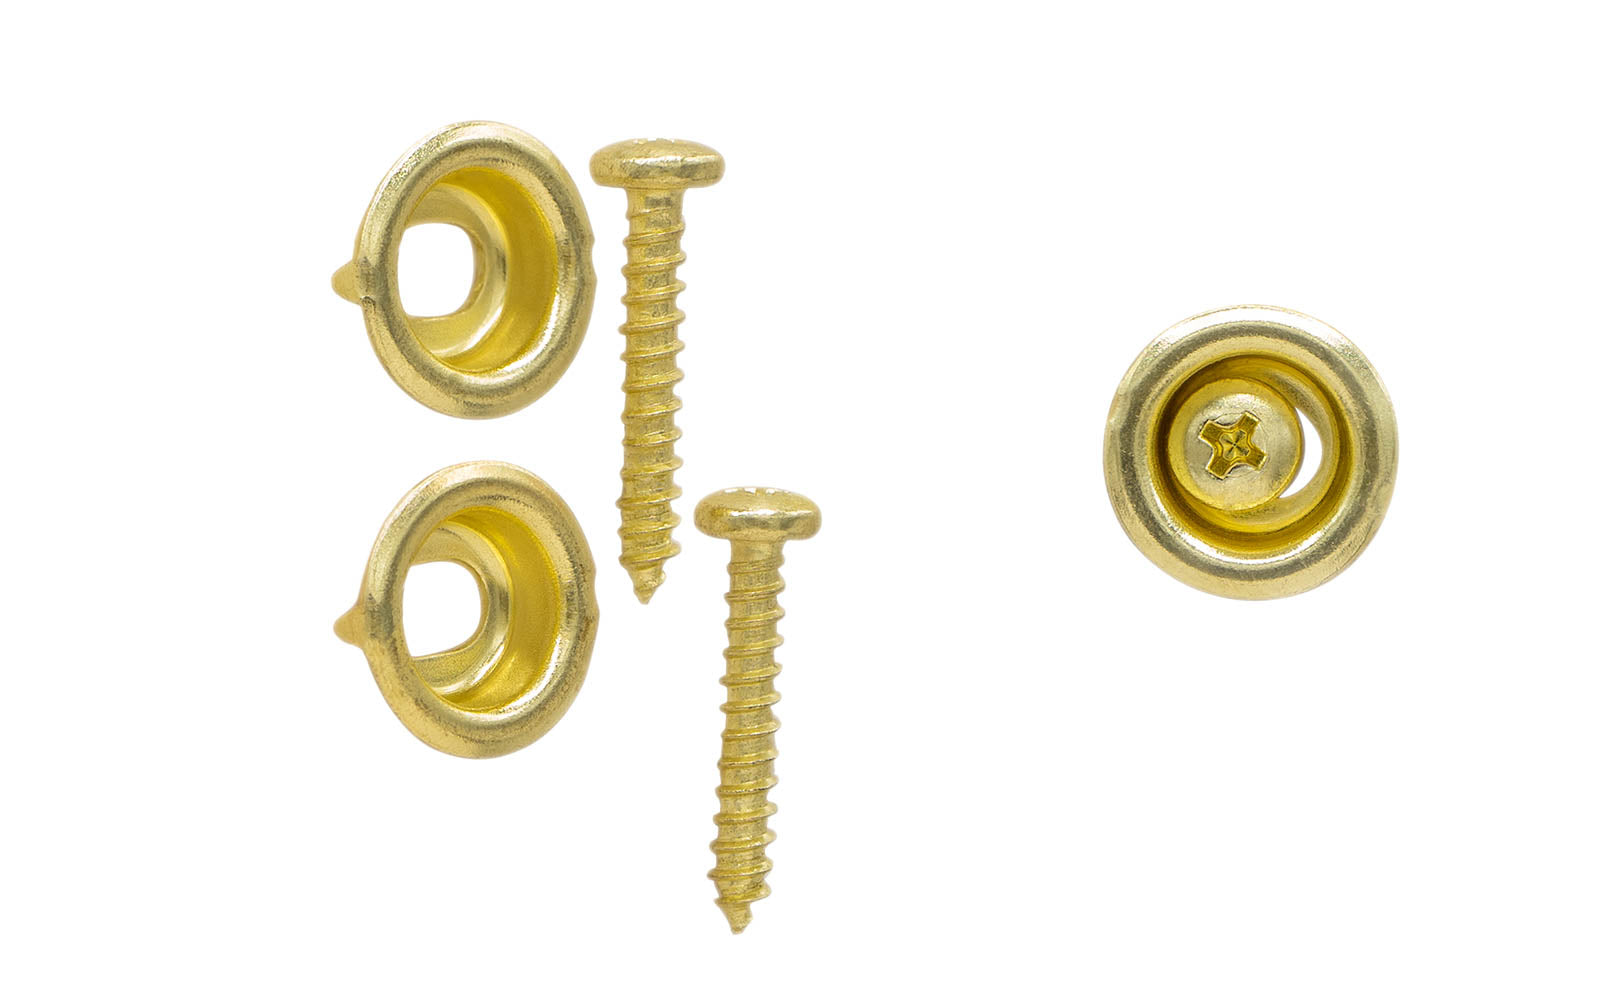 Vintage-style Hardware · Solid Brass Sash Stop Bead Adjusters - Pair. Made of solid brass - Allows 1/8" sideways adjustment - 11/16" Diameter. Allows for easy removal of interior stops of sash windows for repairs, refinishing, & adjustment of windows for smooth operation, especially during seasonal weather changes. Unlacquered brass. Non-lacquered brass (will patina naturally over time). 